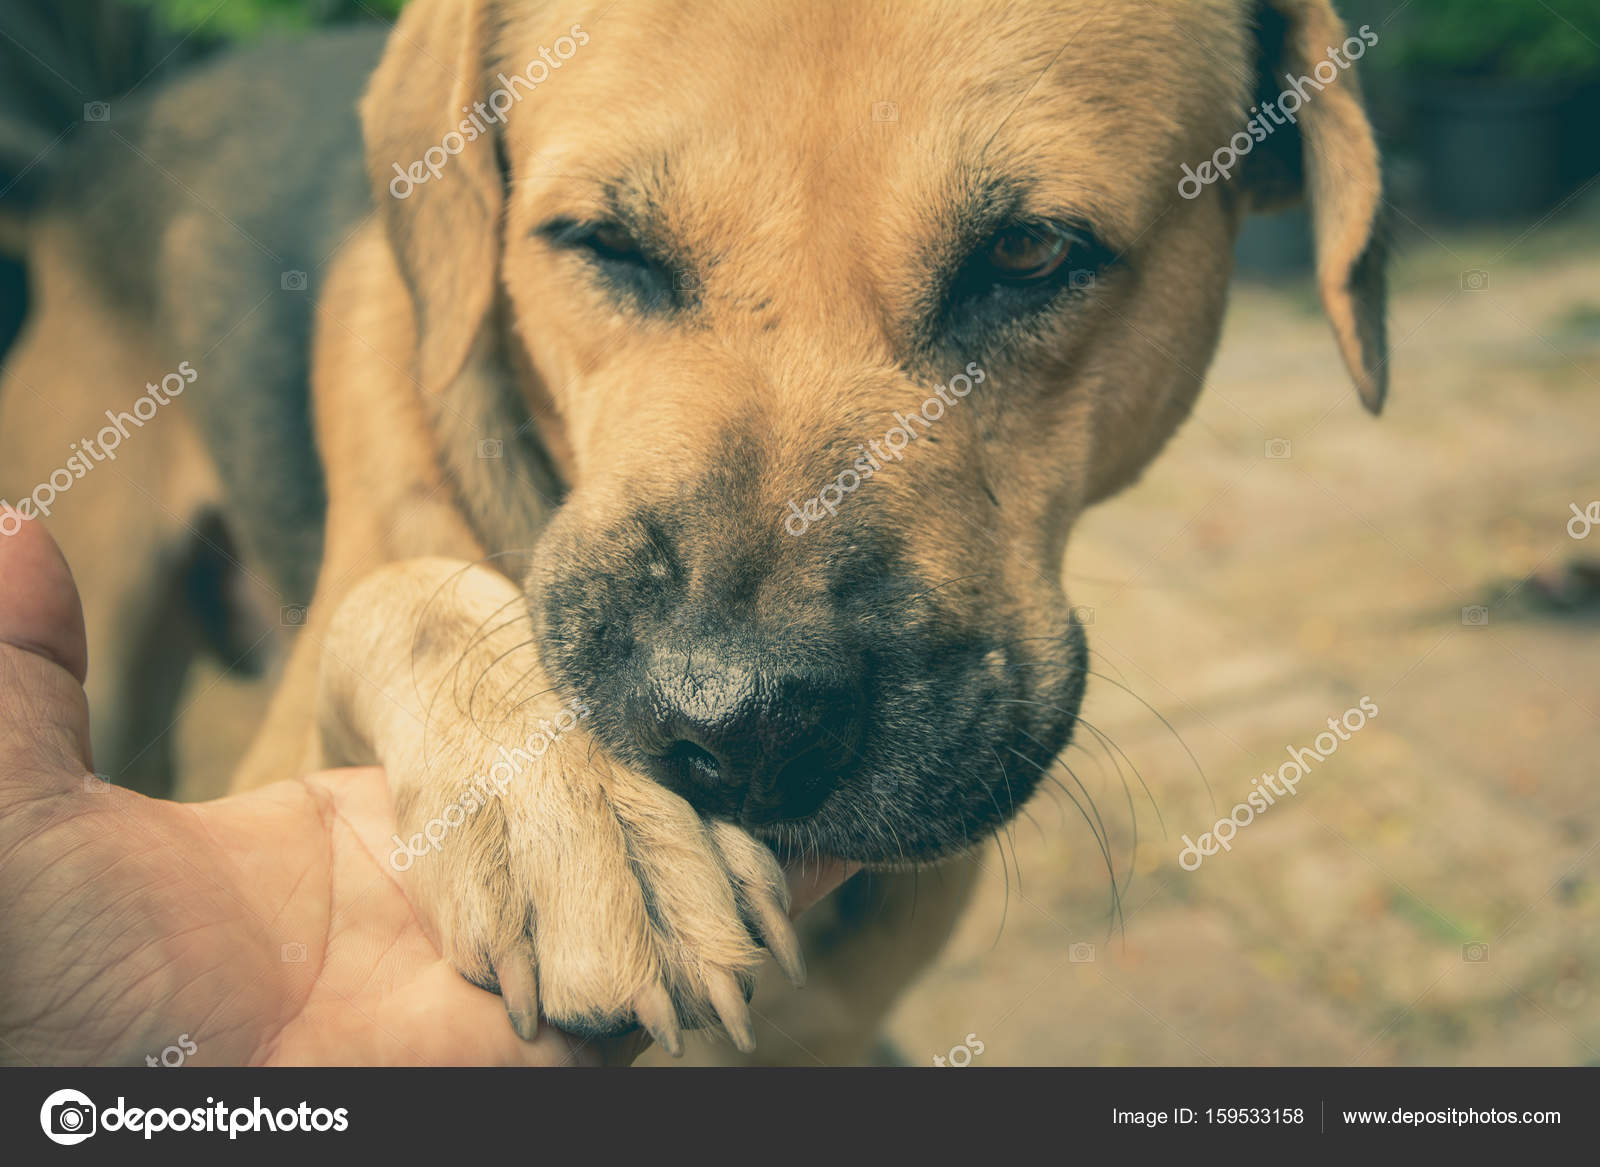 shaking hand with human, friendship between and dogs. Dog paw and human hand shaking. Photo by ©krisana_antharith.hotmail.com 159533158